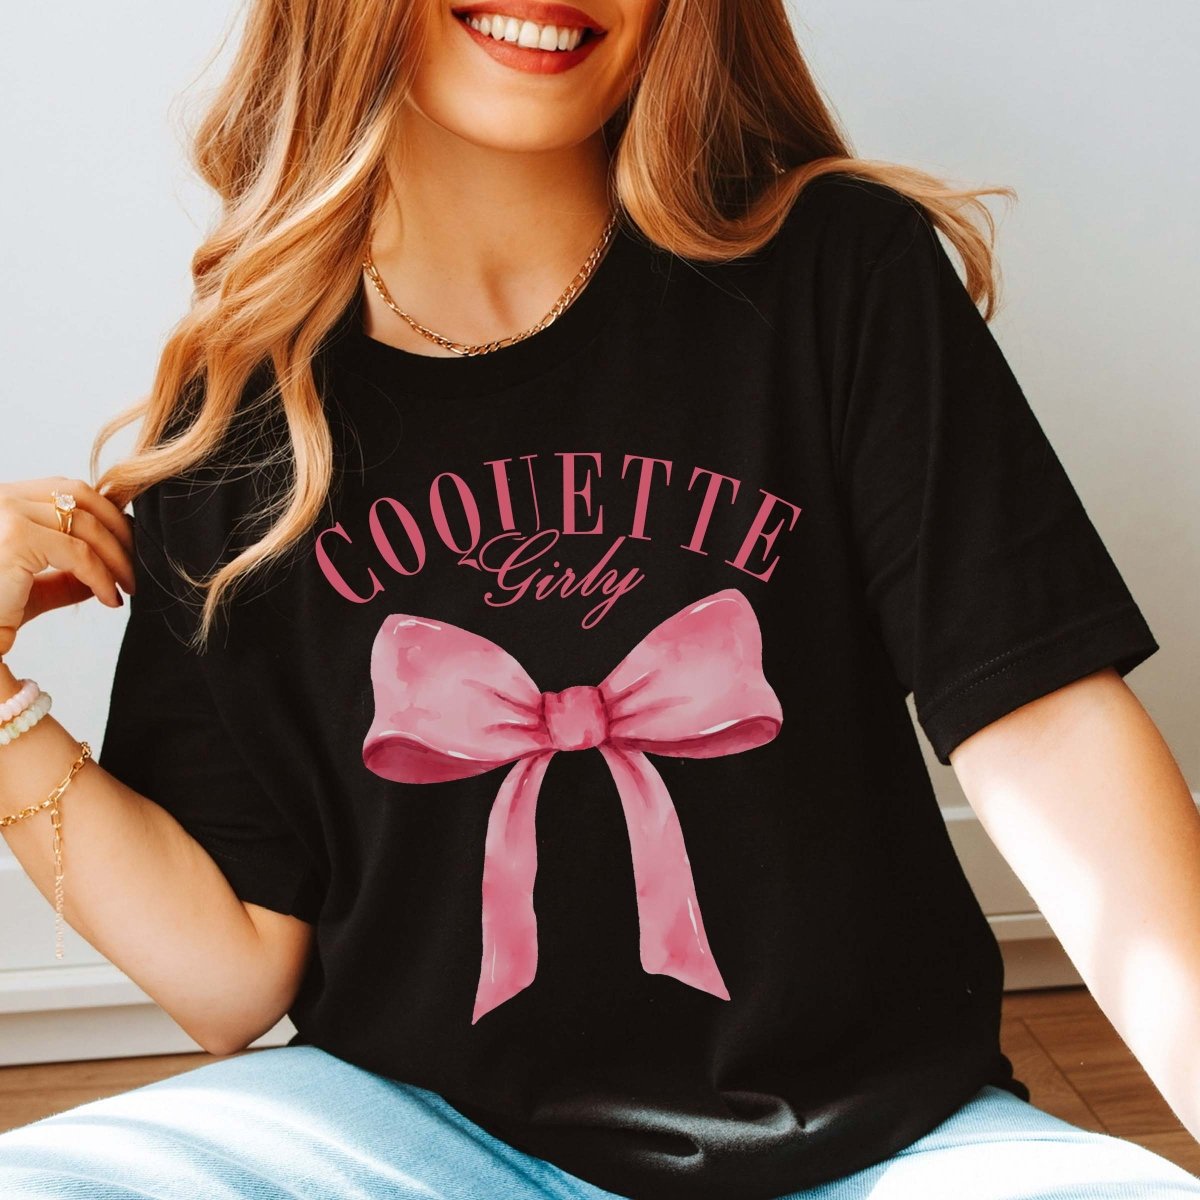 Coquette Girly Tee - Limeberry Designs